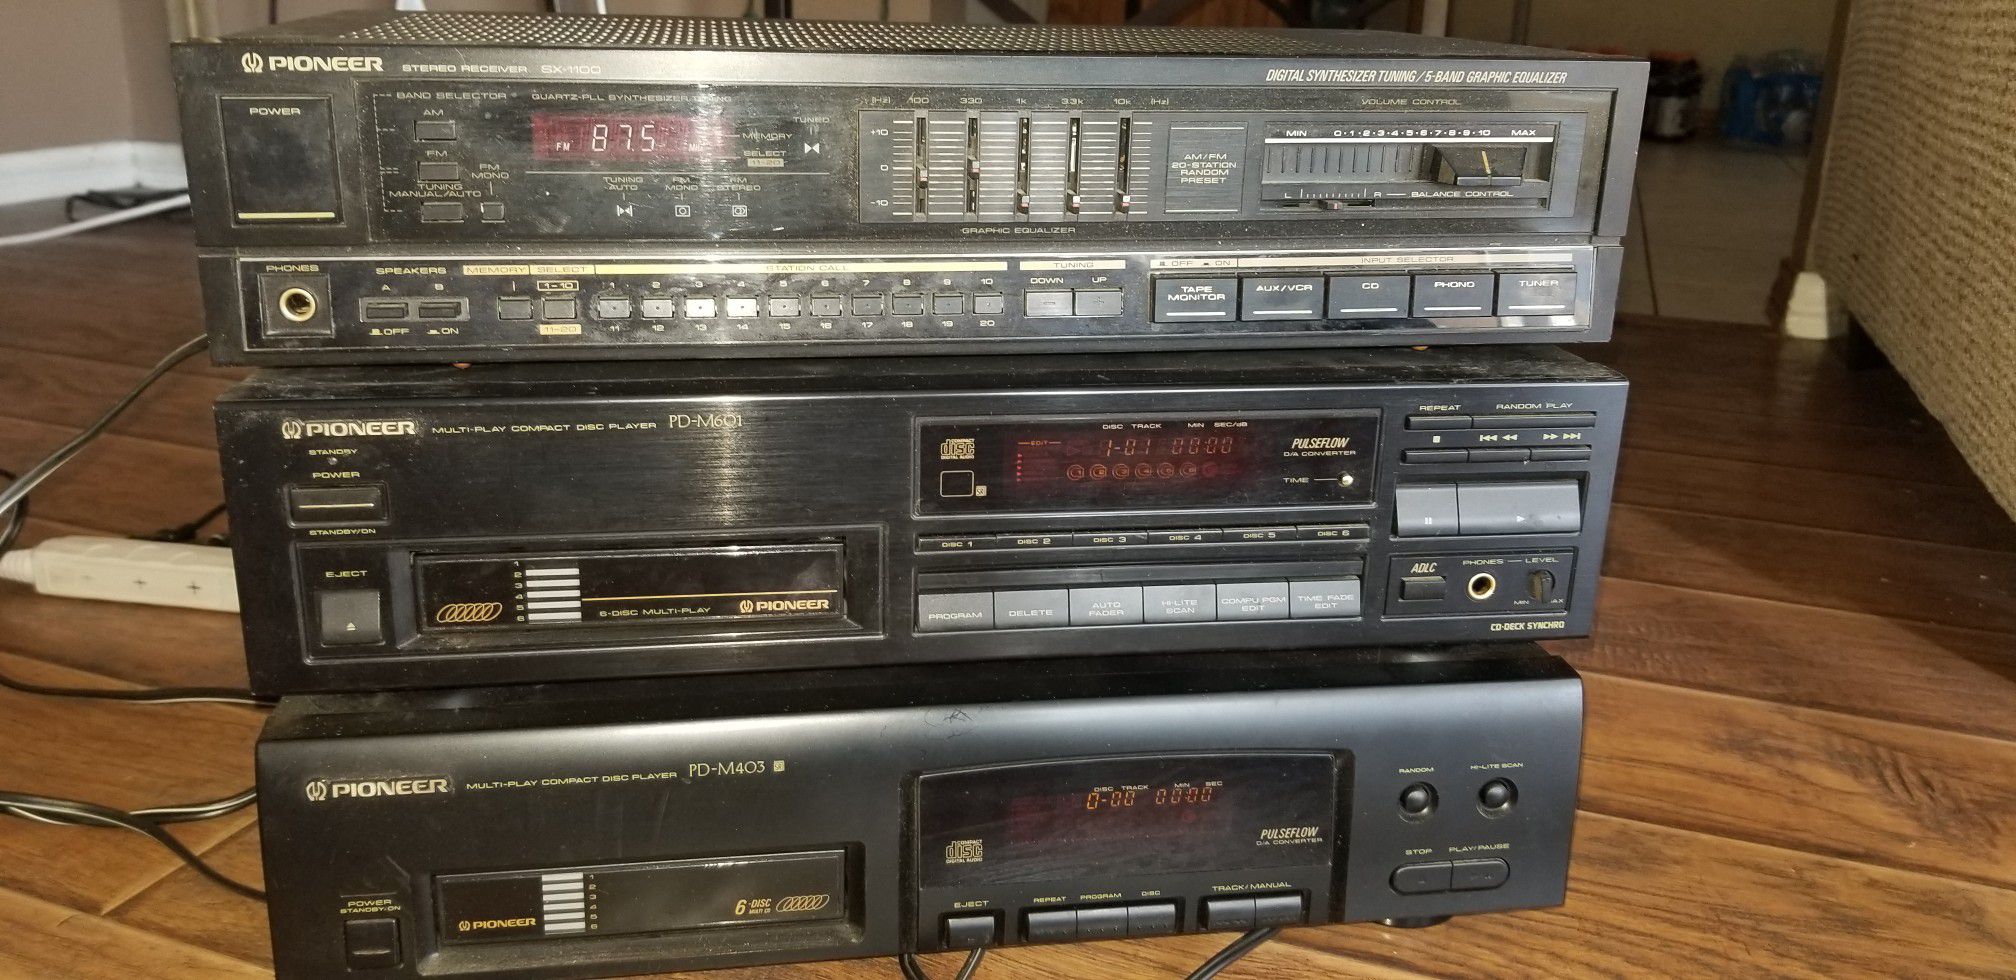 Pioneer lot 2 6 disc cd changers stereo receiver all 3 working 125.00